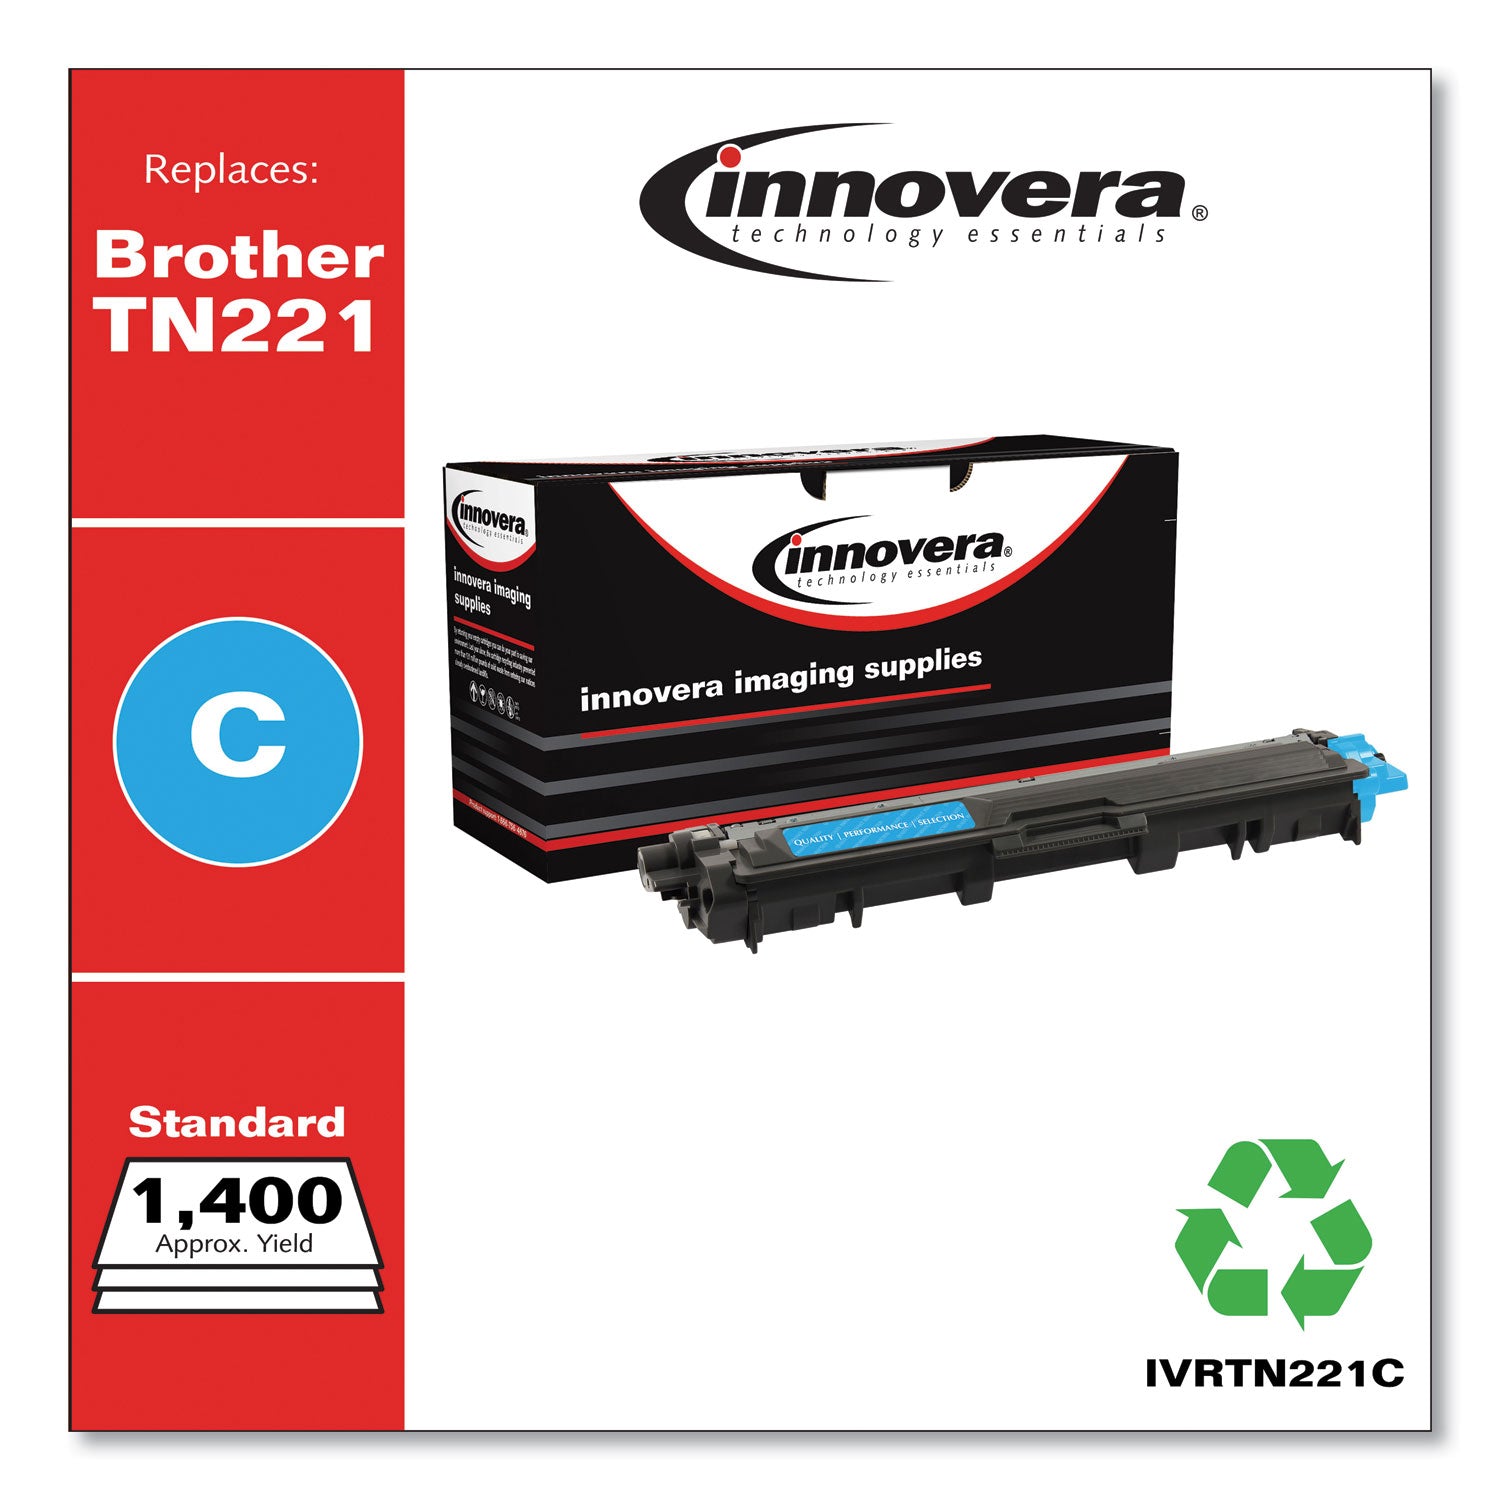 remanufactured-cyan-toner-replacement-for-tn221c-1400-page-yield_ivrtn221c - 2